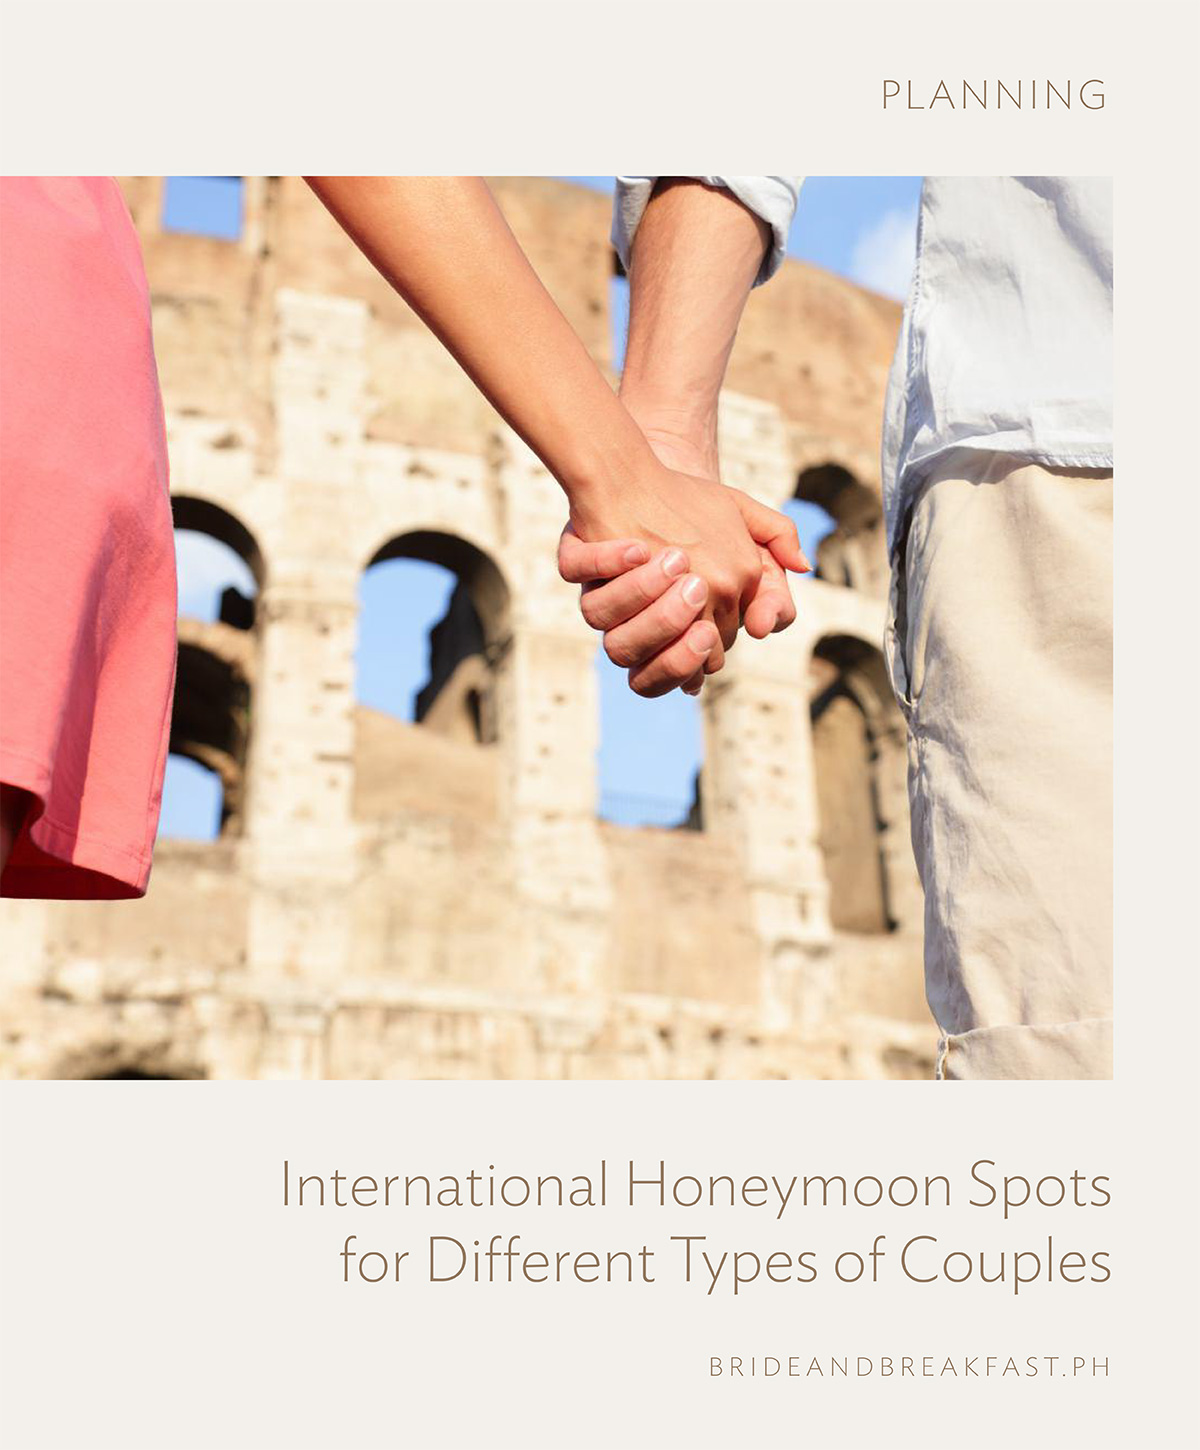 International Honeymoon Spots for Different Types of Couples